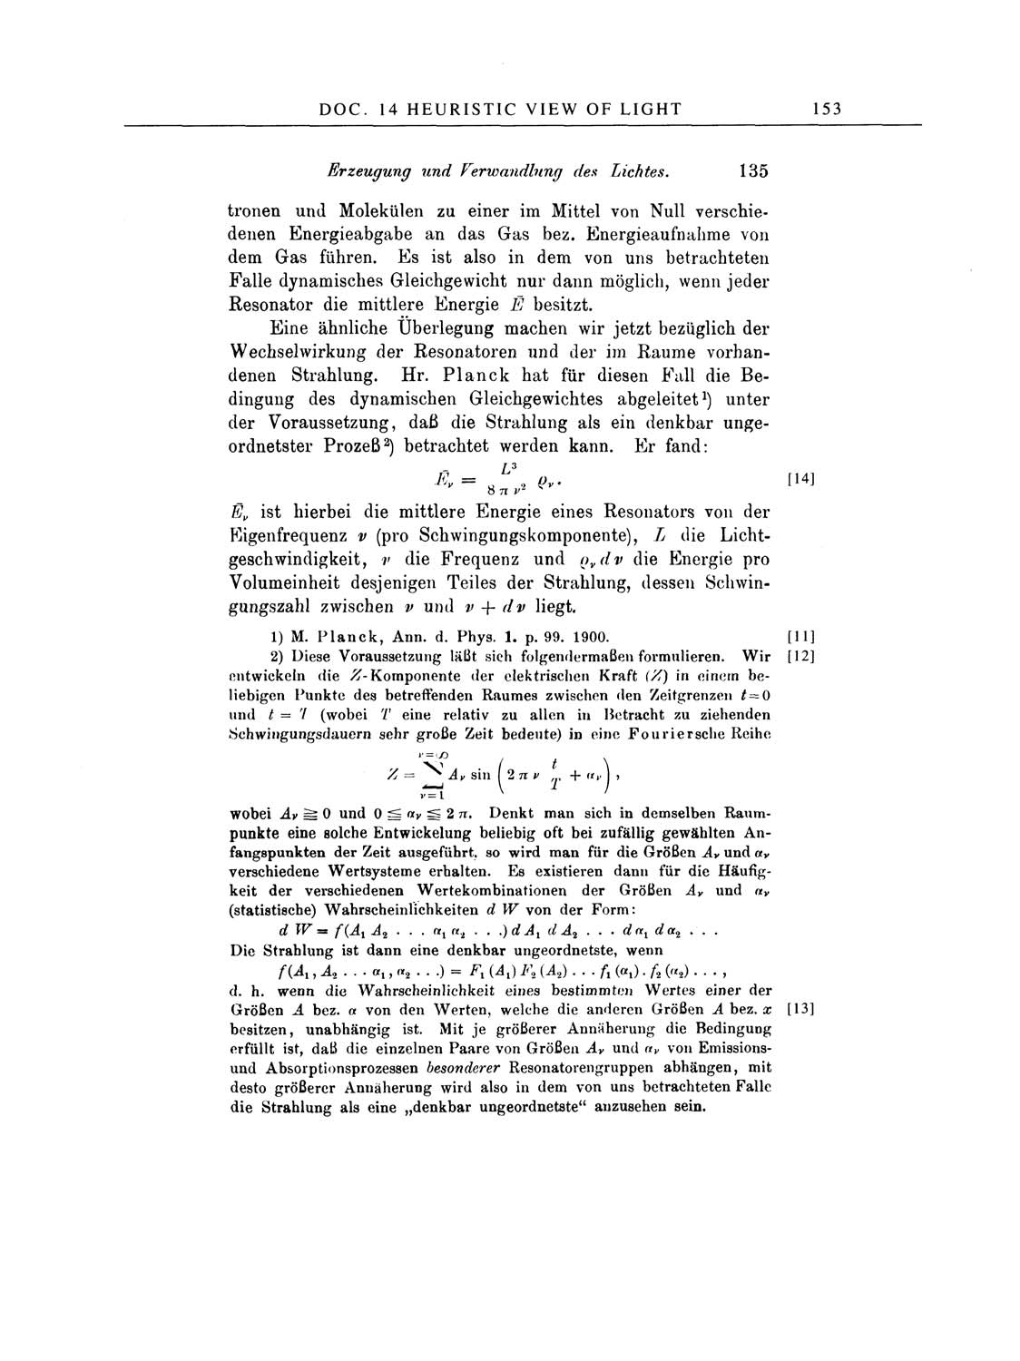 Volume 2: The Swiss Years: Writings, 1900-1909 page 153